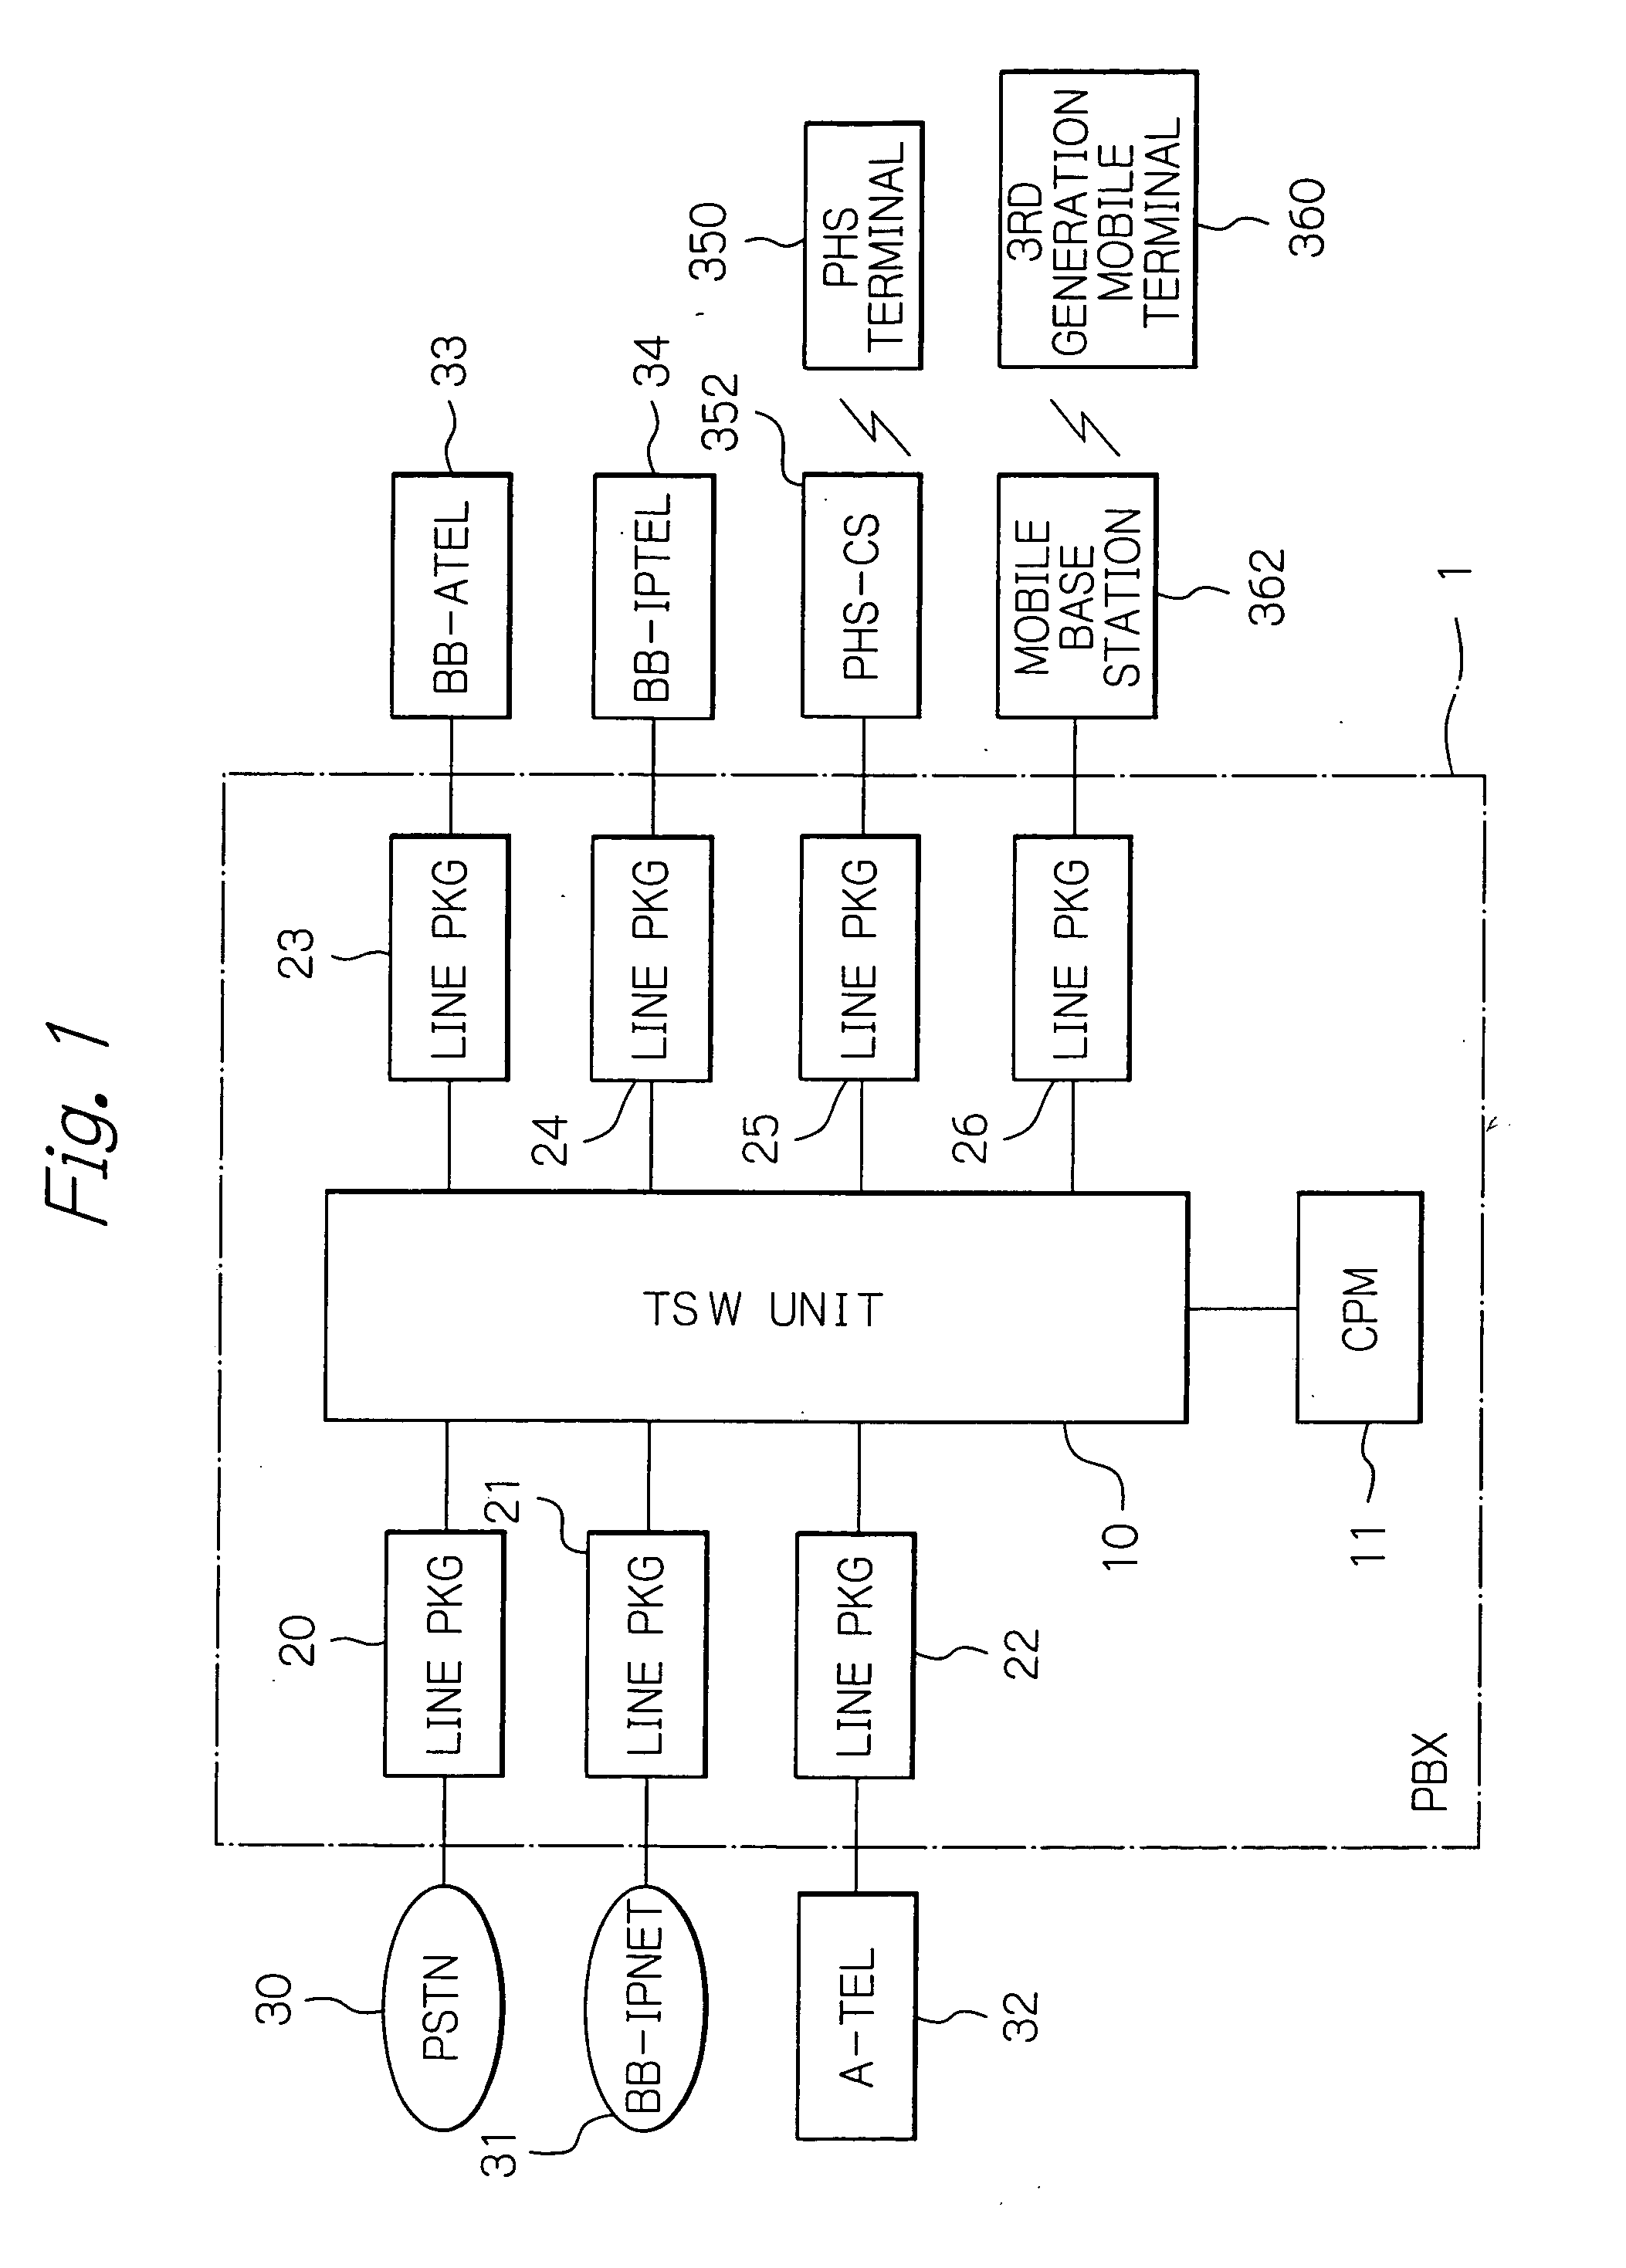 Telephone switching system accommodating a plurality of line packages